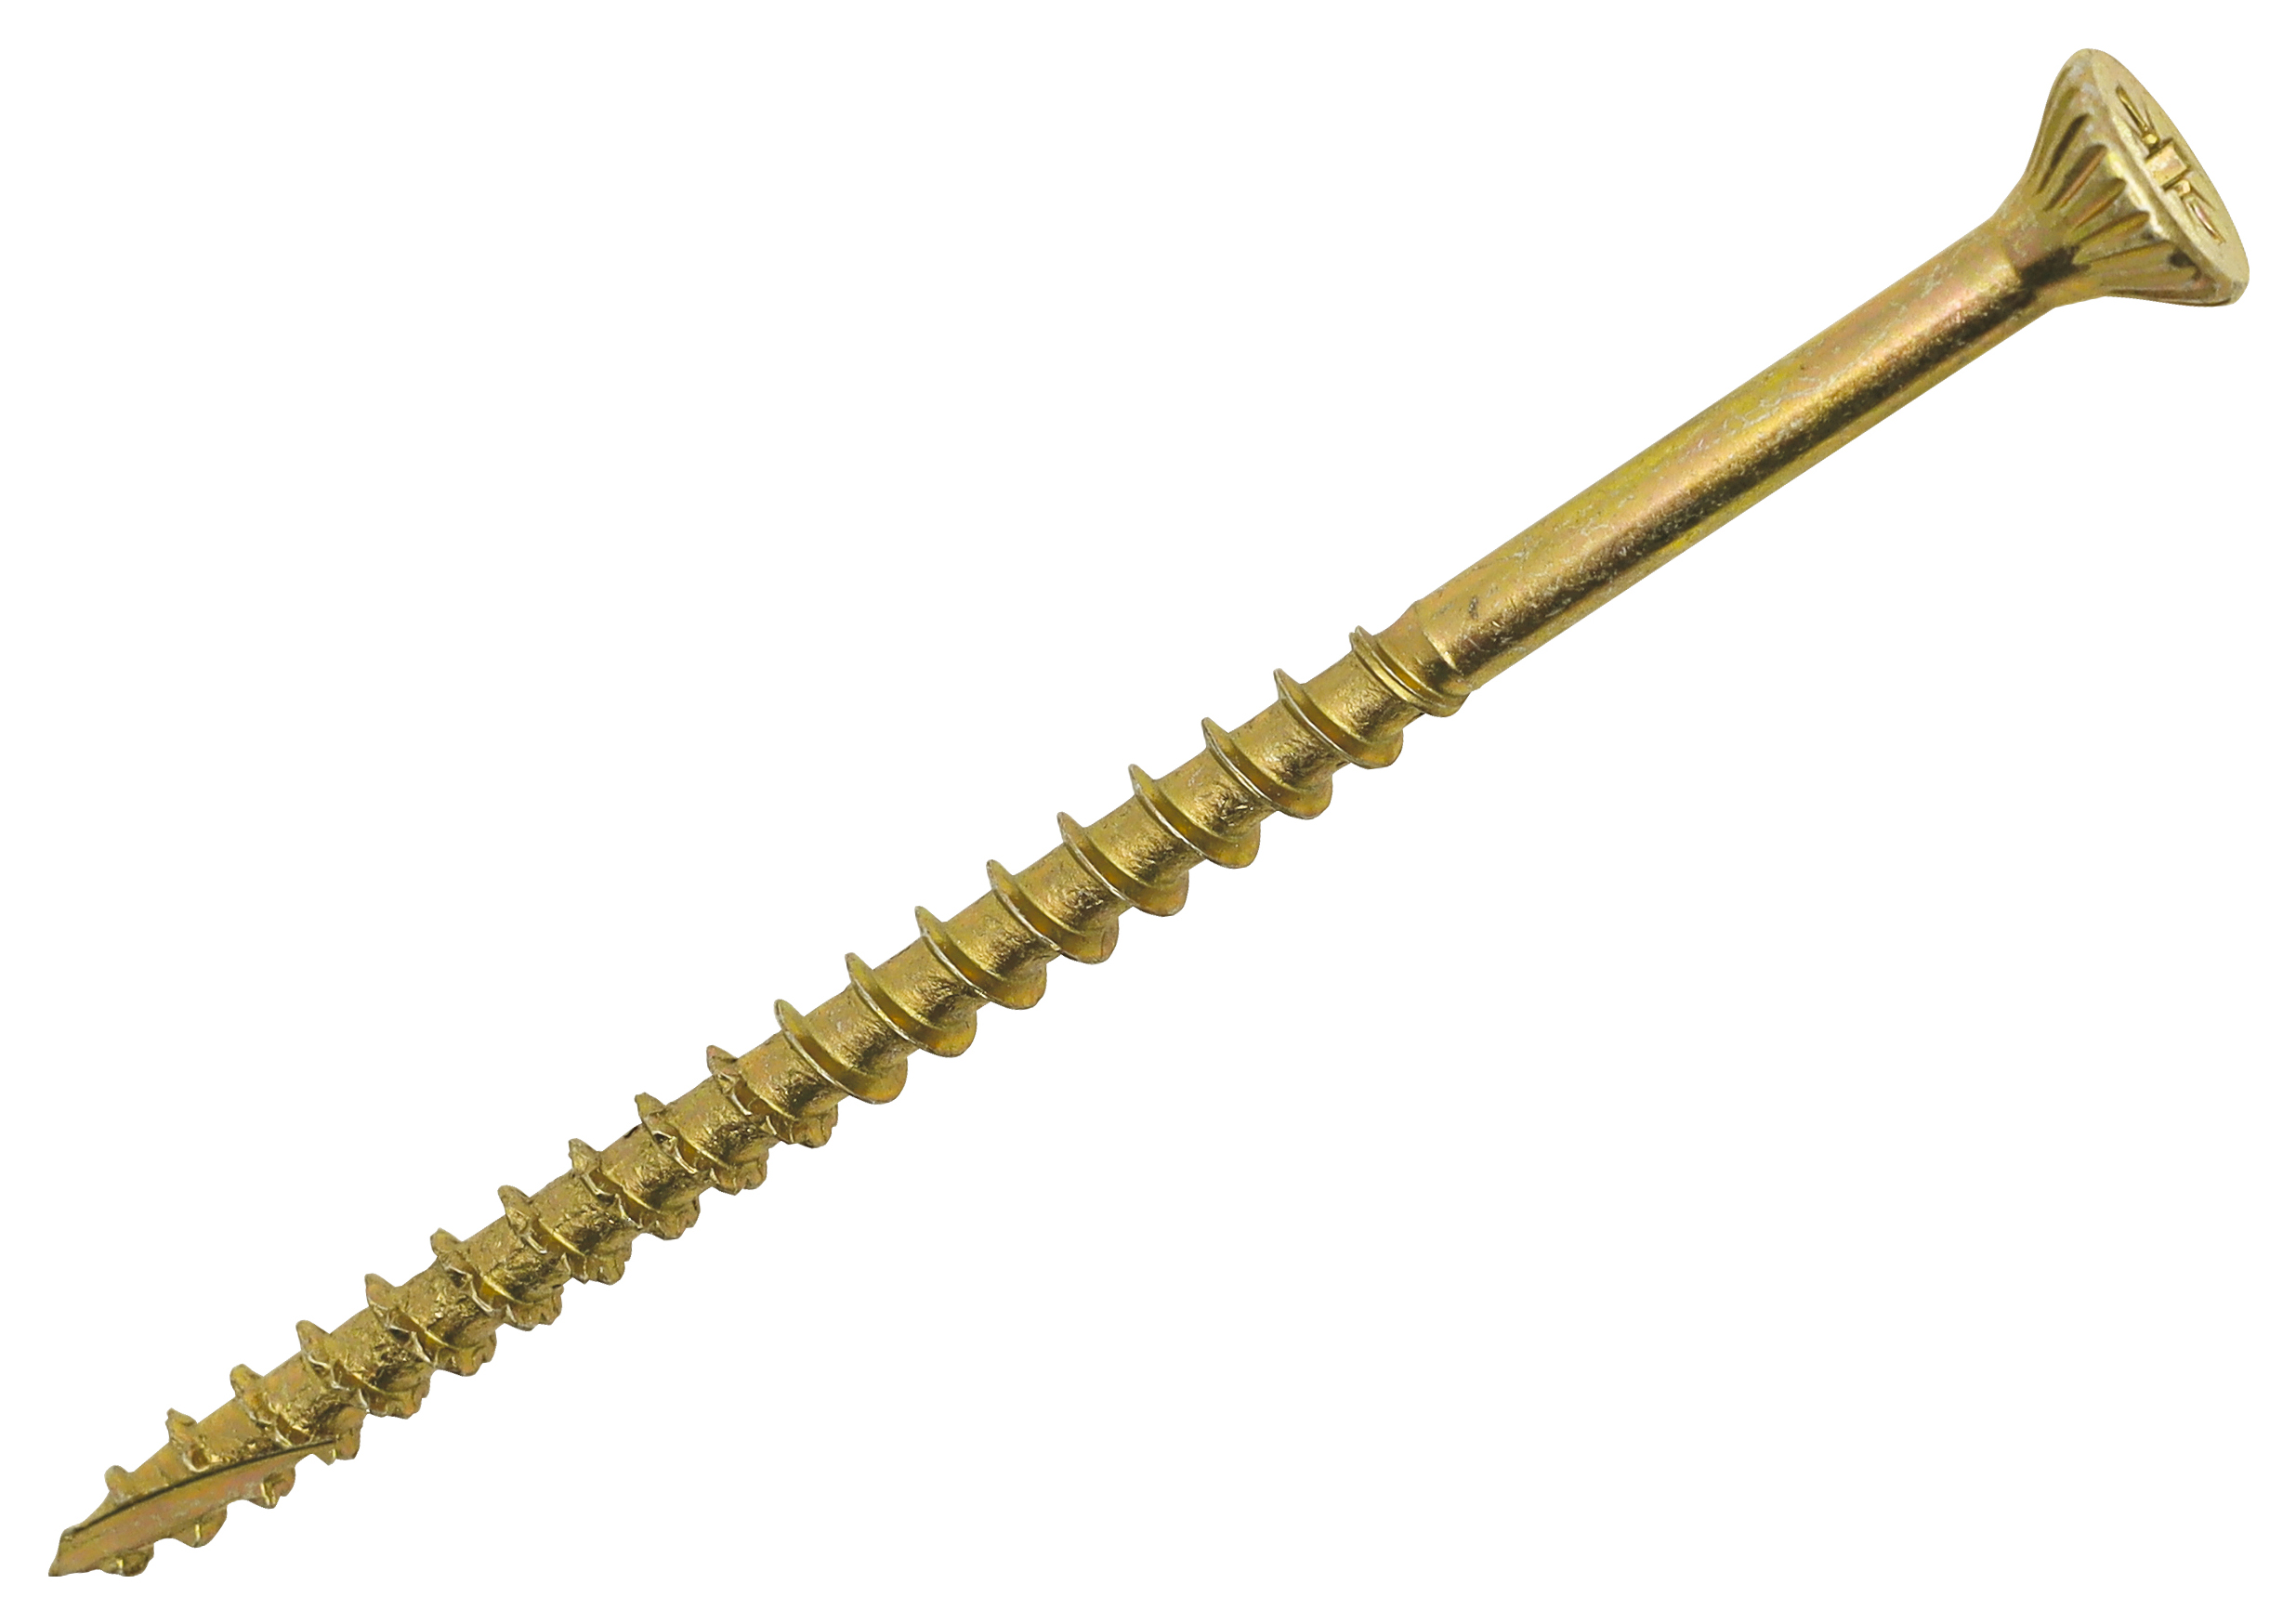 Optimaxx PZ Countersunk Passivated Double Reinforced Wood Screw - 5 x 90mm - Pack of 200